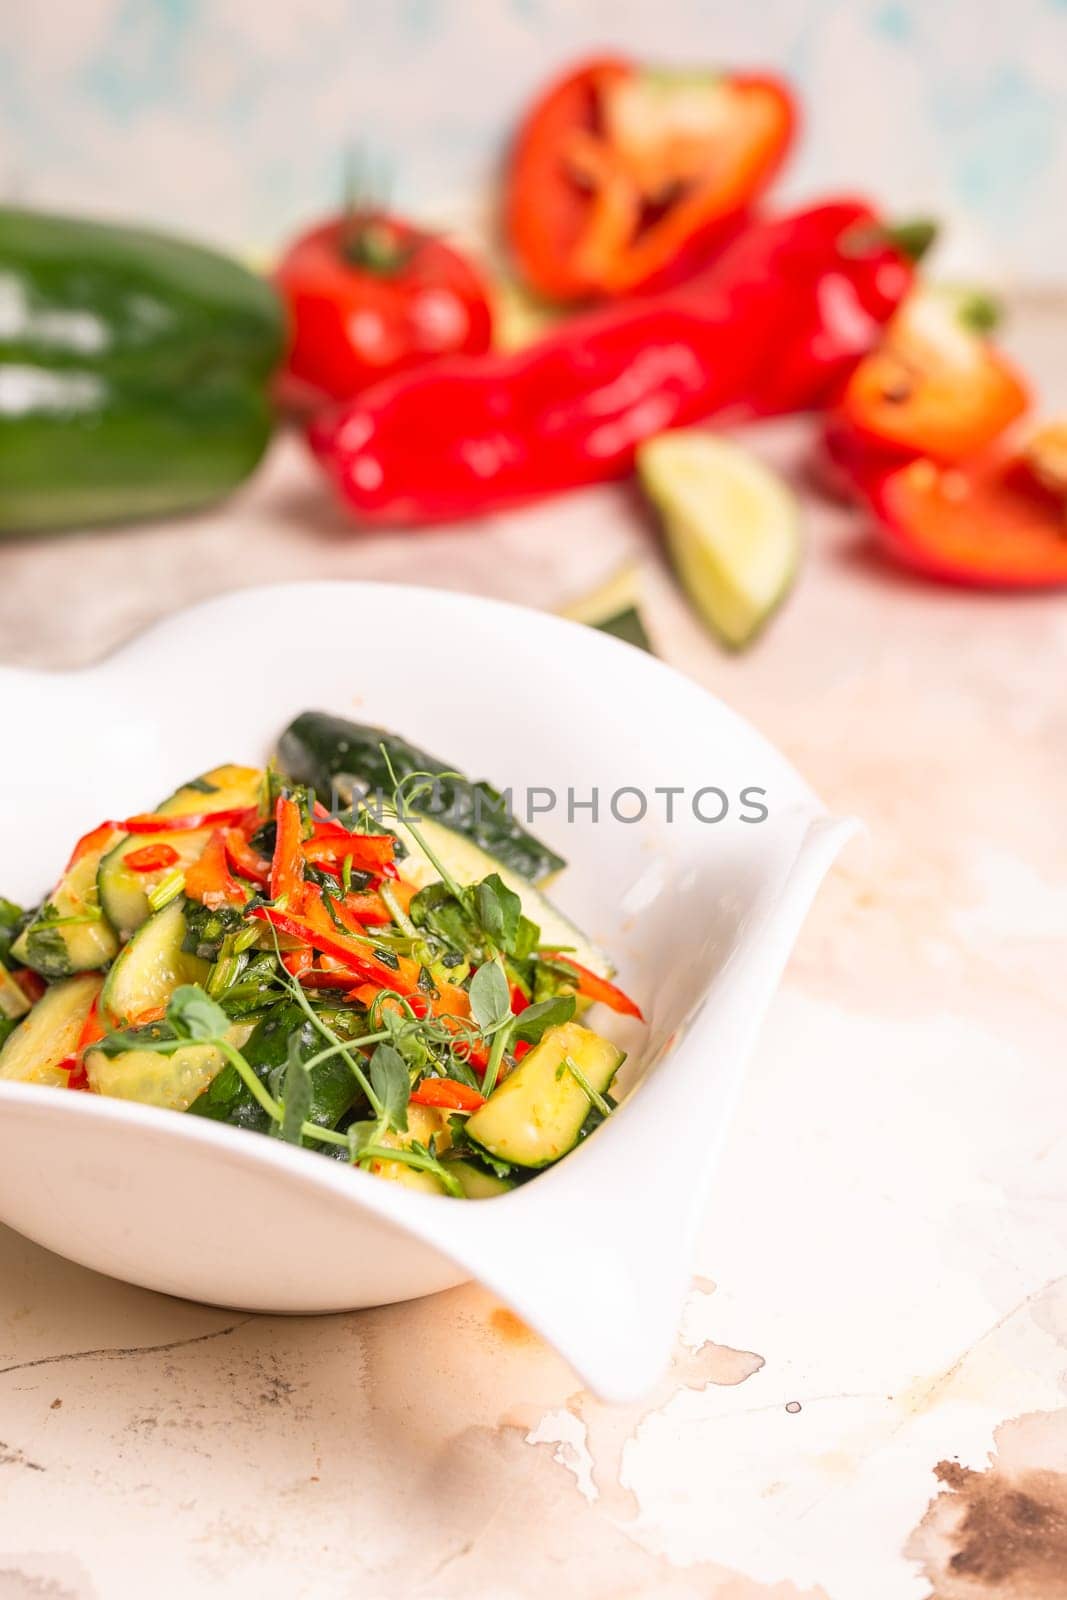 Fresh cucumbers, bell peppers, and herbs on white plate, pink background by Pukhovskiy